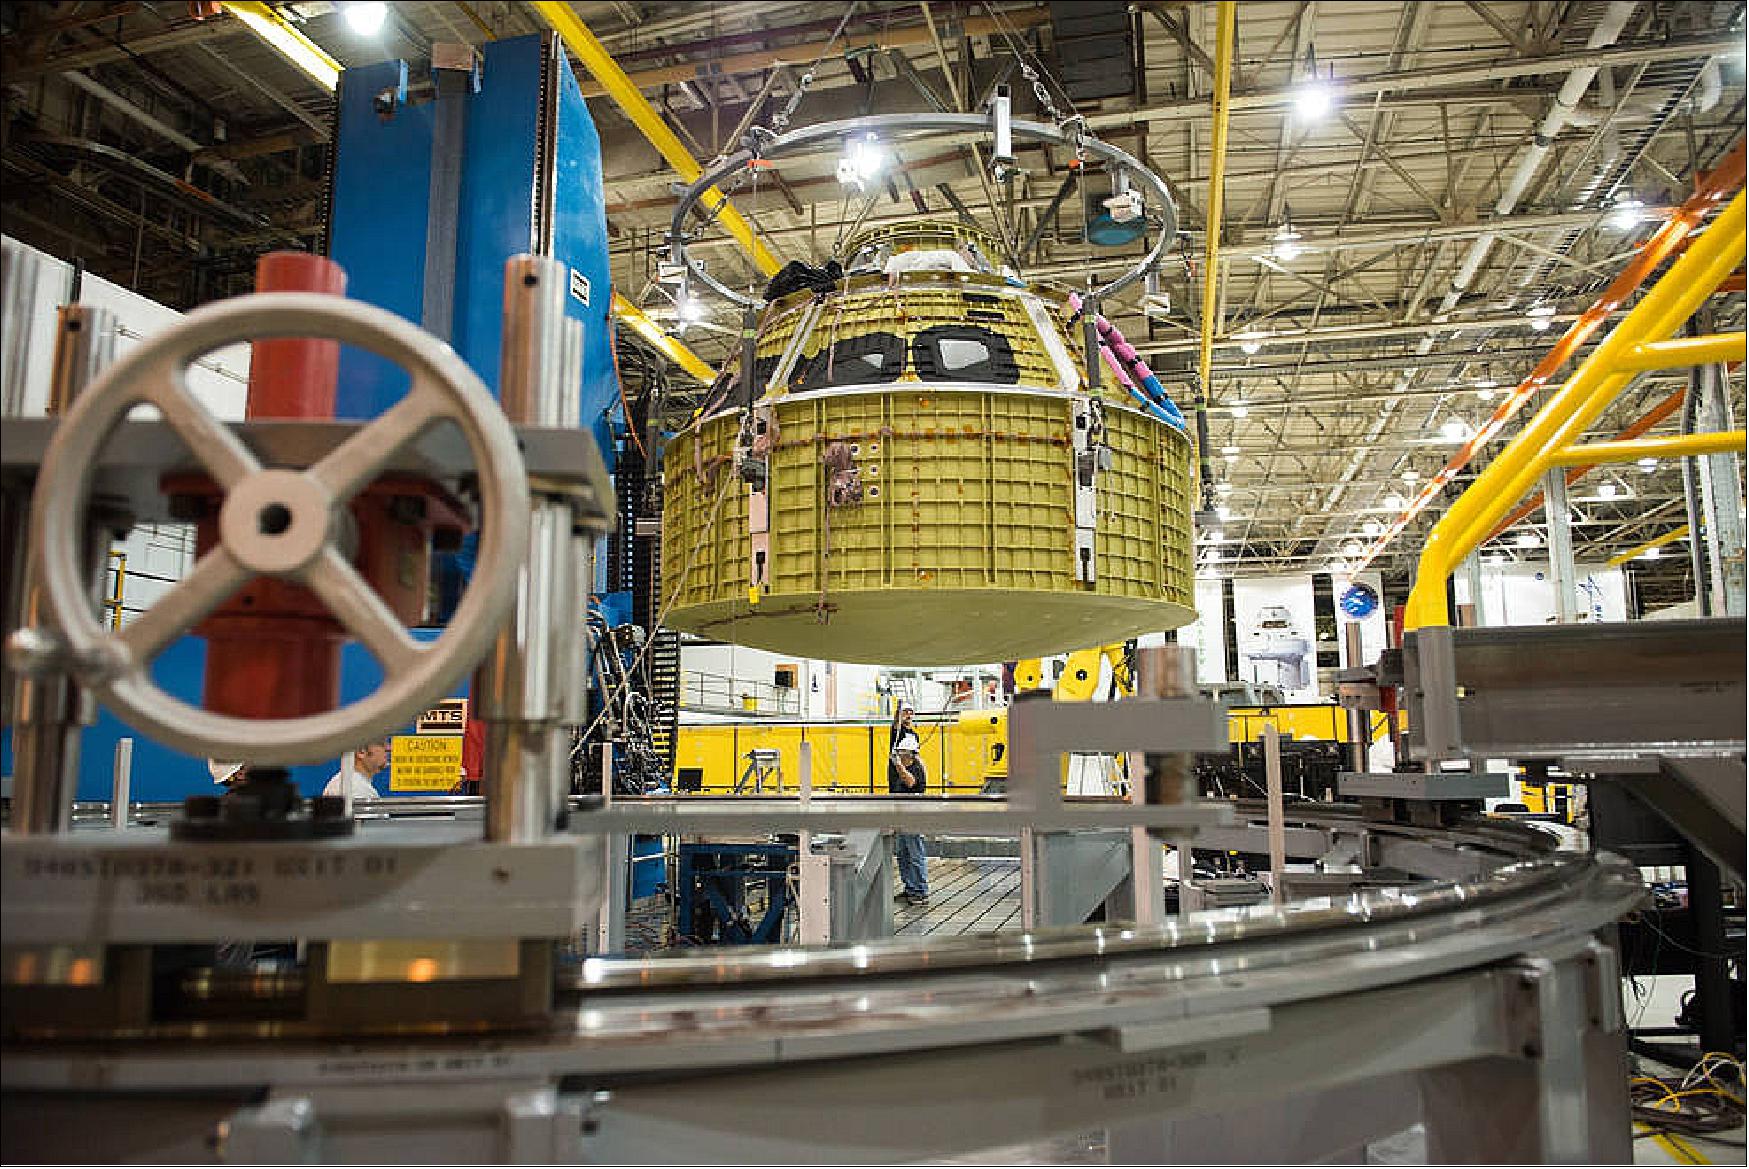 Figure 79: Orion EM-1 pressure vessel was completed Jan. 13, 2016 at NASA’s Michoud Assembly Facility in New Orleans, LA. The pressure vessel is the spacecraft’s underlying structure on which all of the spacecraft’s systems and subsystems are built and integrated (image credit: NASA)